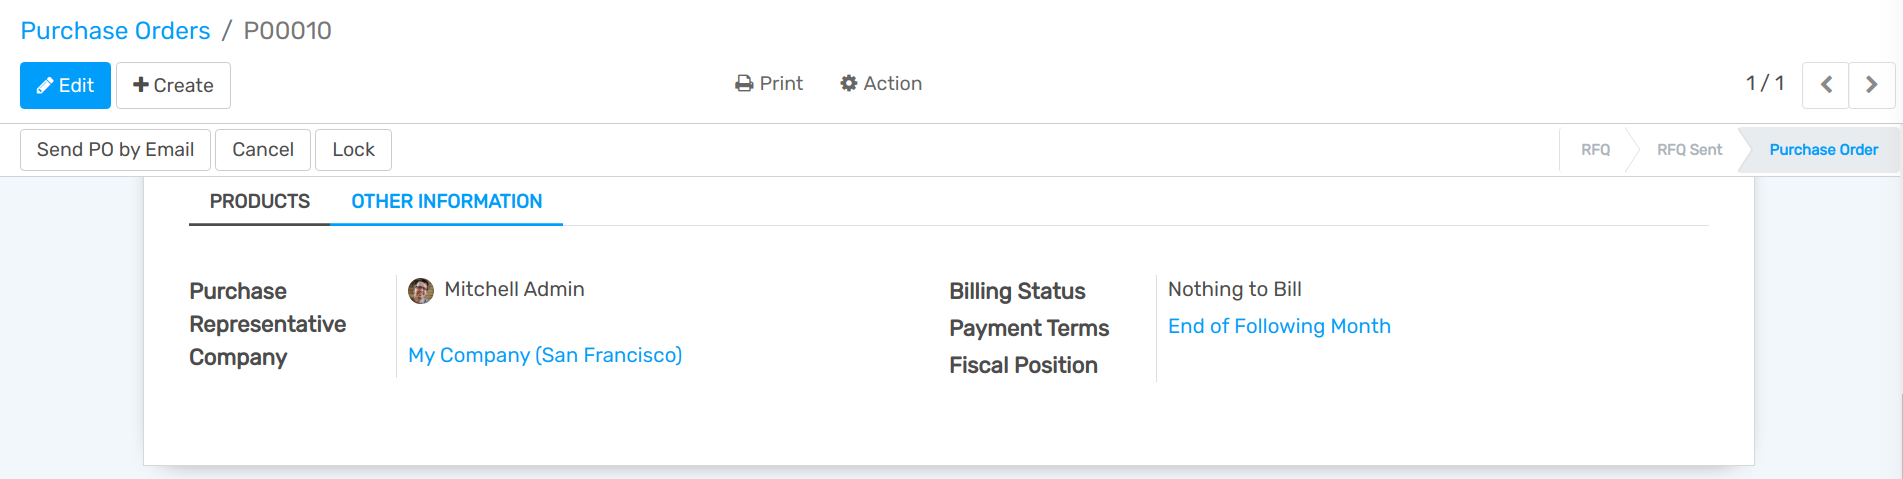 Purchase order billing status in Flectra Purchase